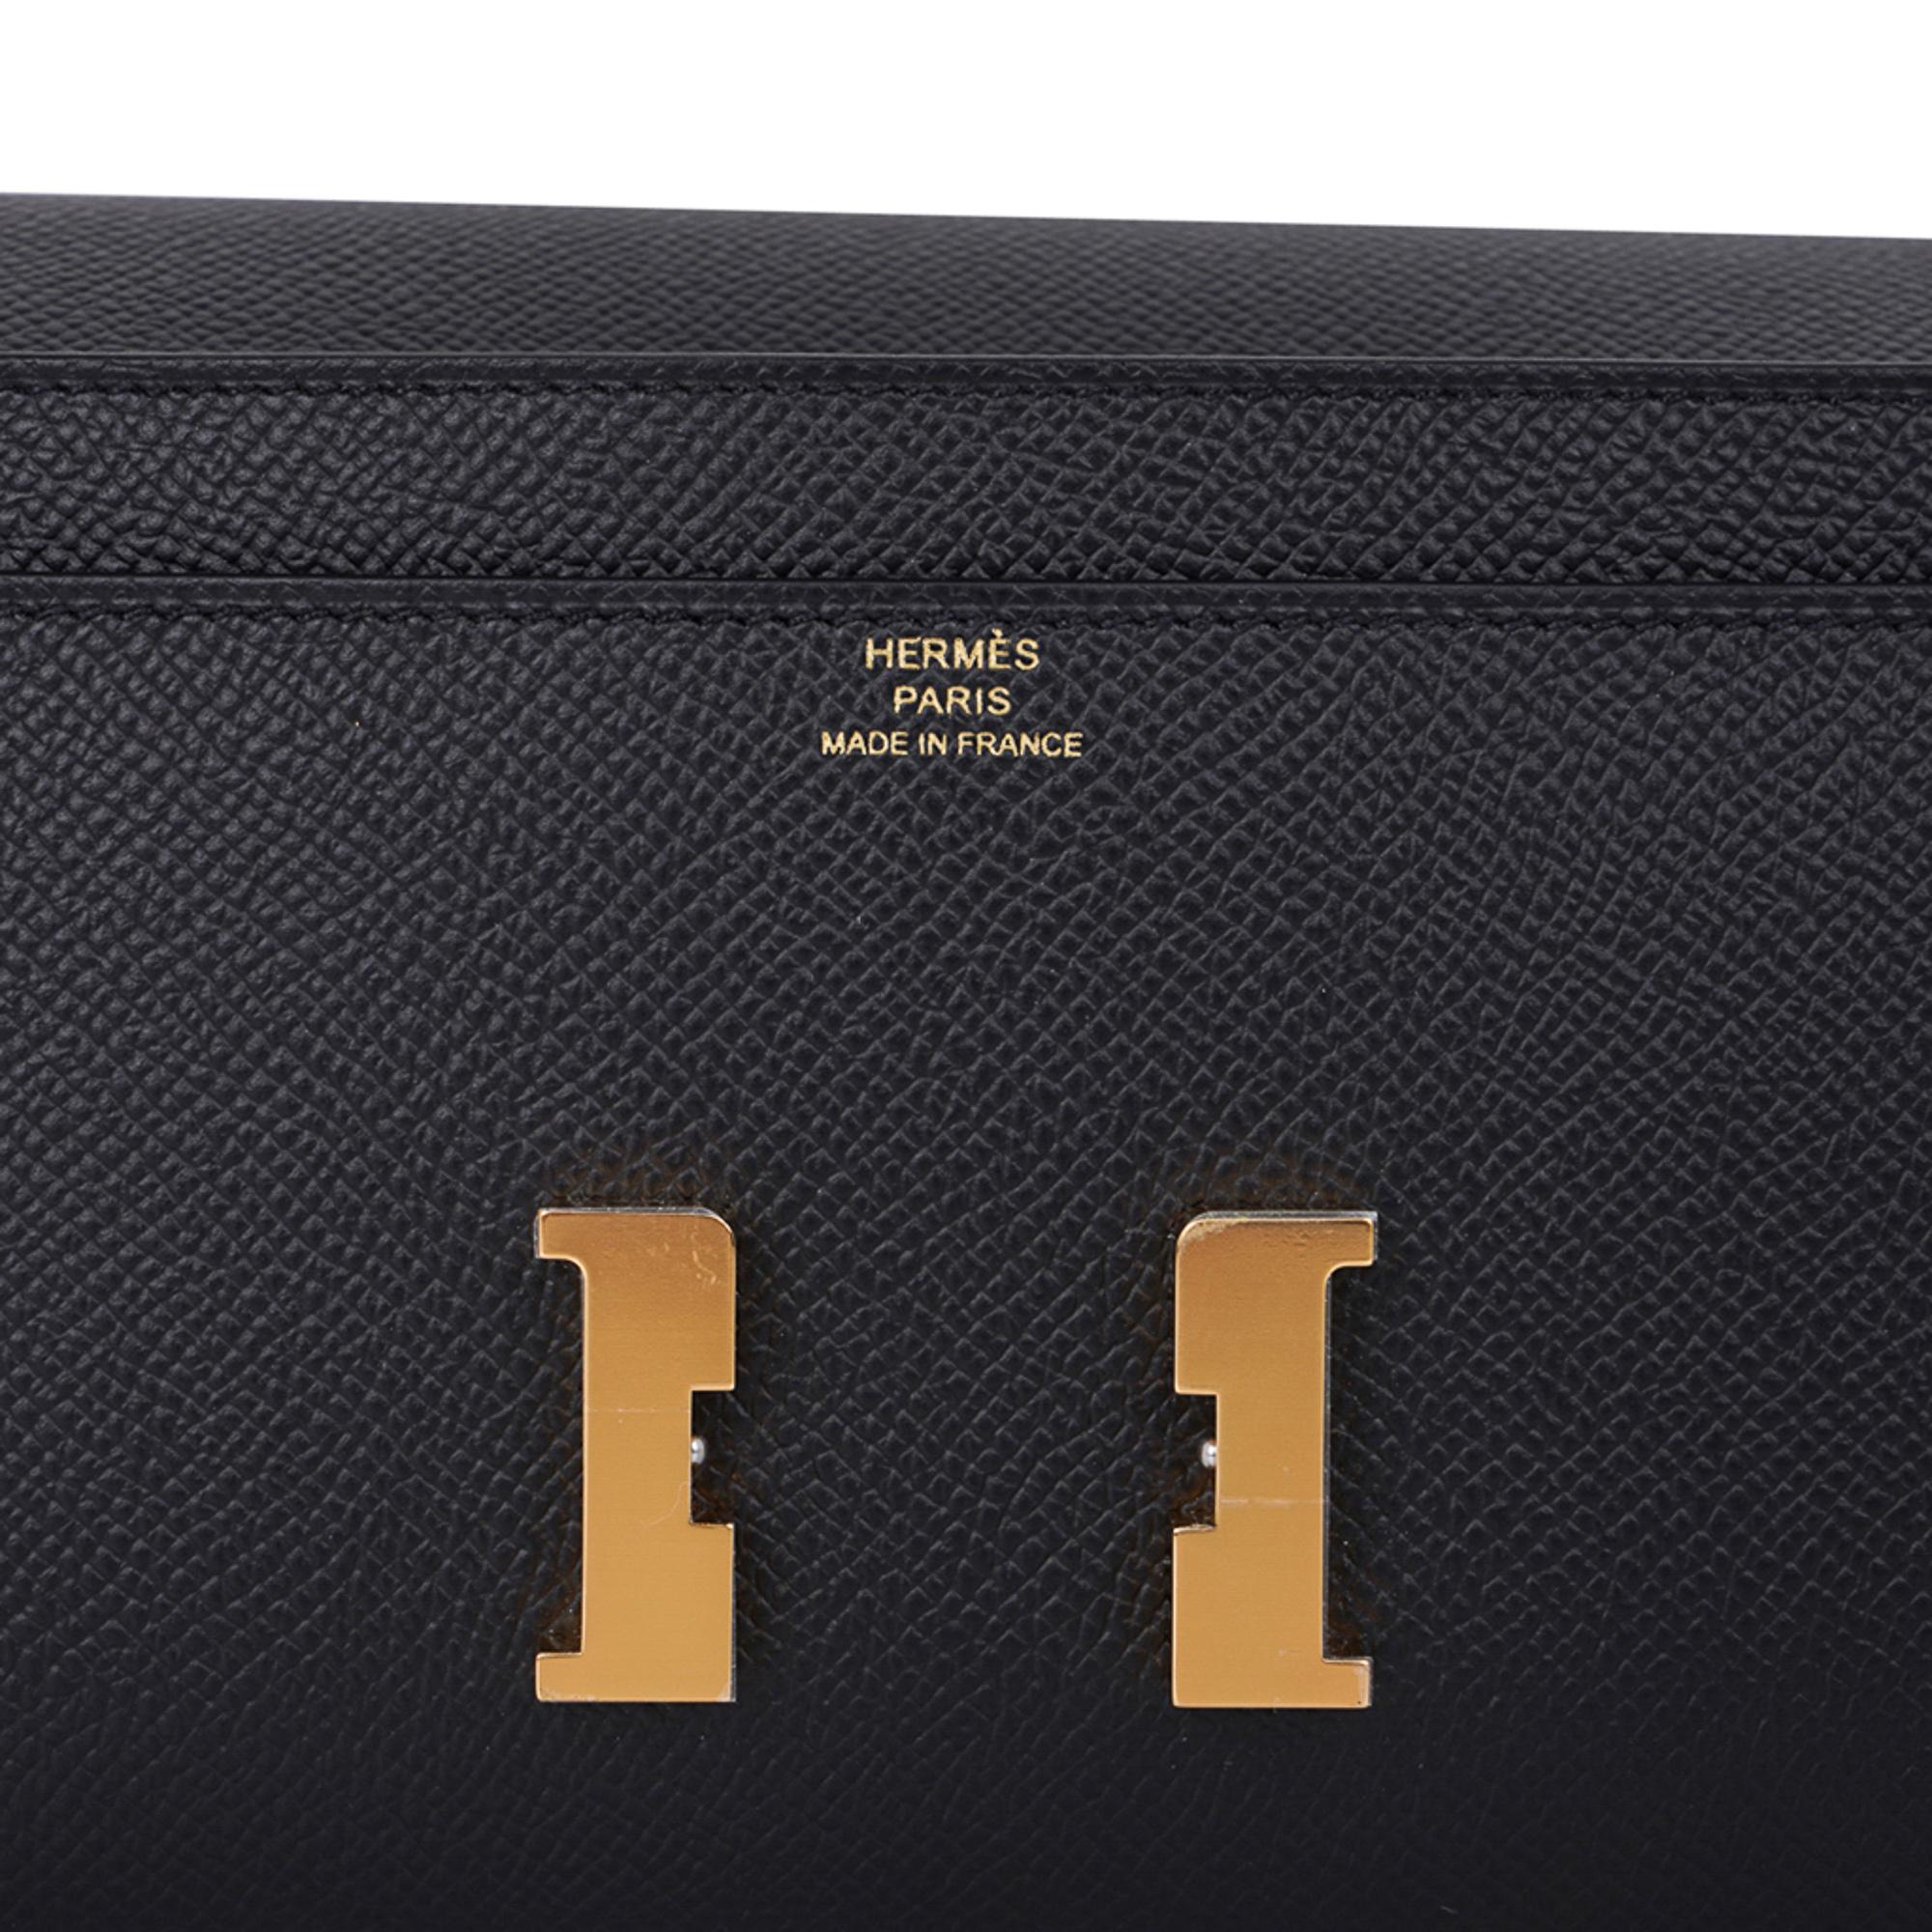 Mightychic offers a guaranteed authentic coveted Hermes Constance Long To Go Wallet featured in Black.
Rich Gold hardware.
Epsom leather.
The consummate Wallet on a Chain!  
Detachable strap turns it into a clutch for you.
Classic Constance push